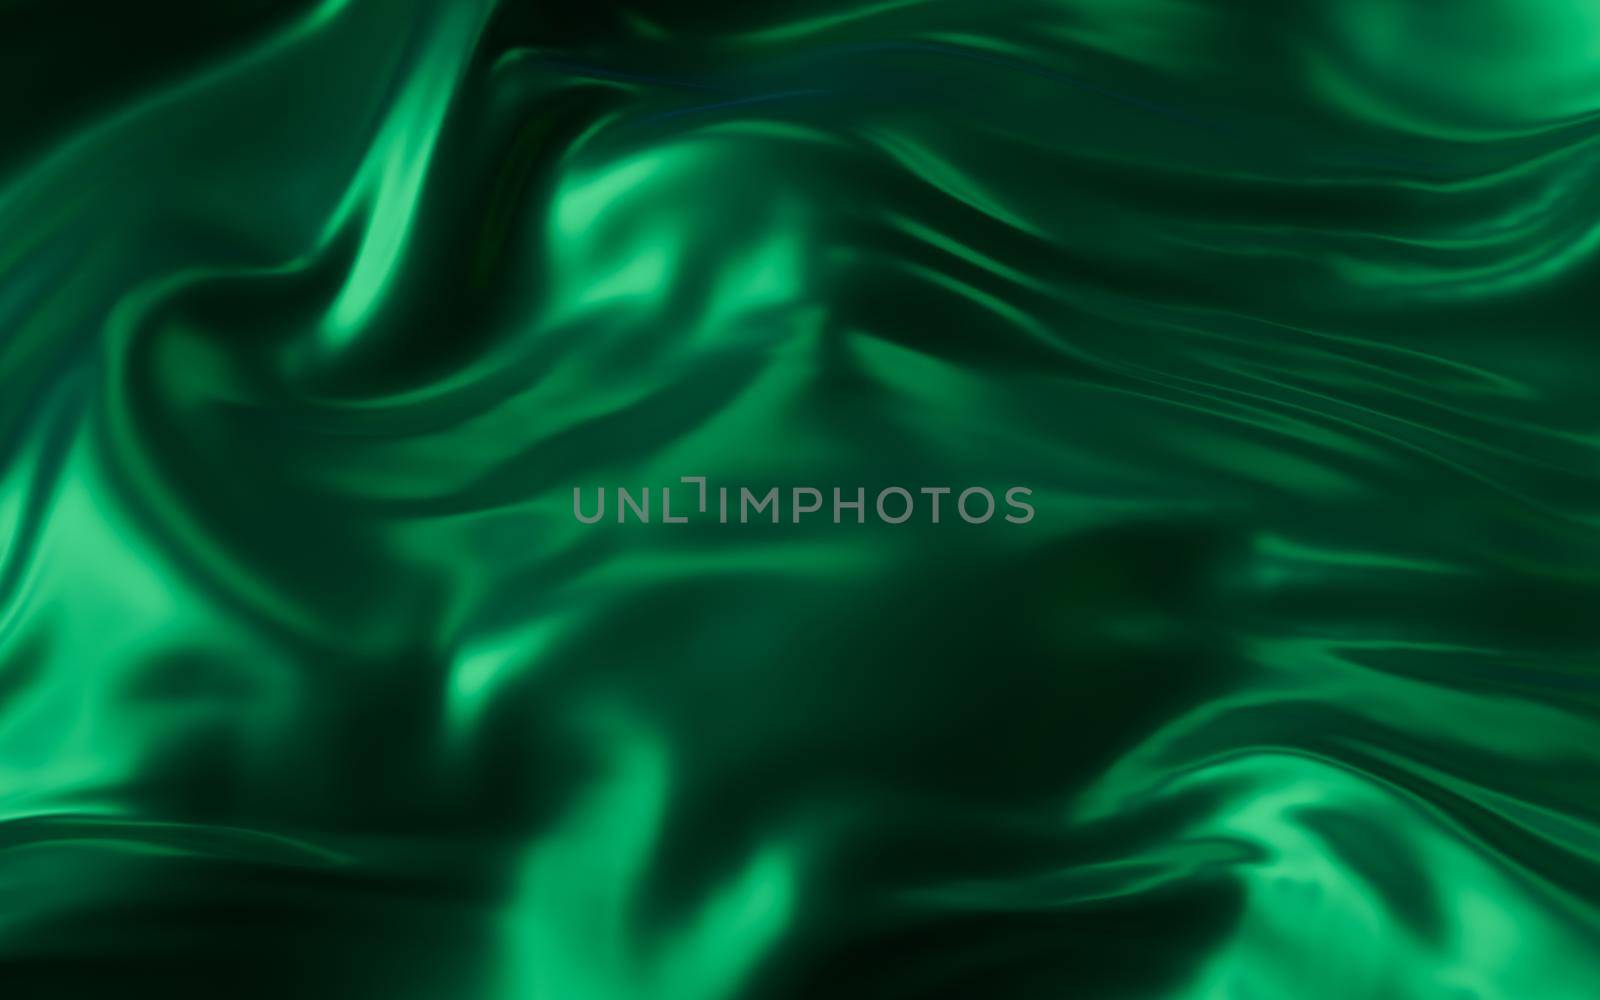 Flowing green cloth background, 3d rendering. by vinkfan